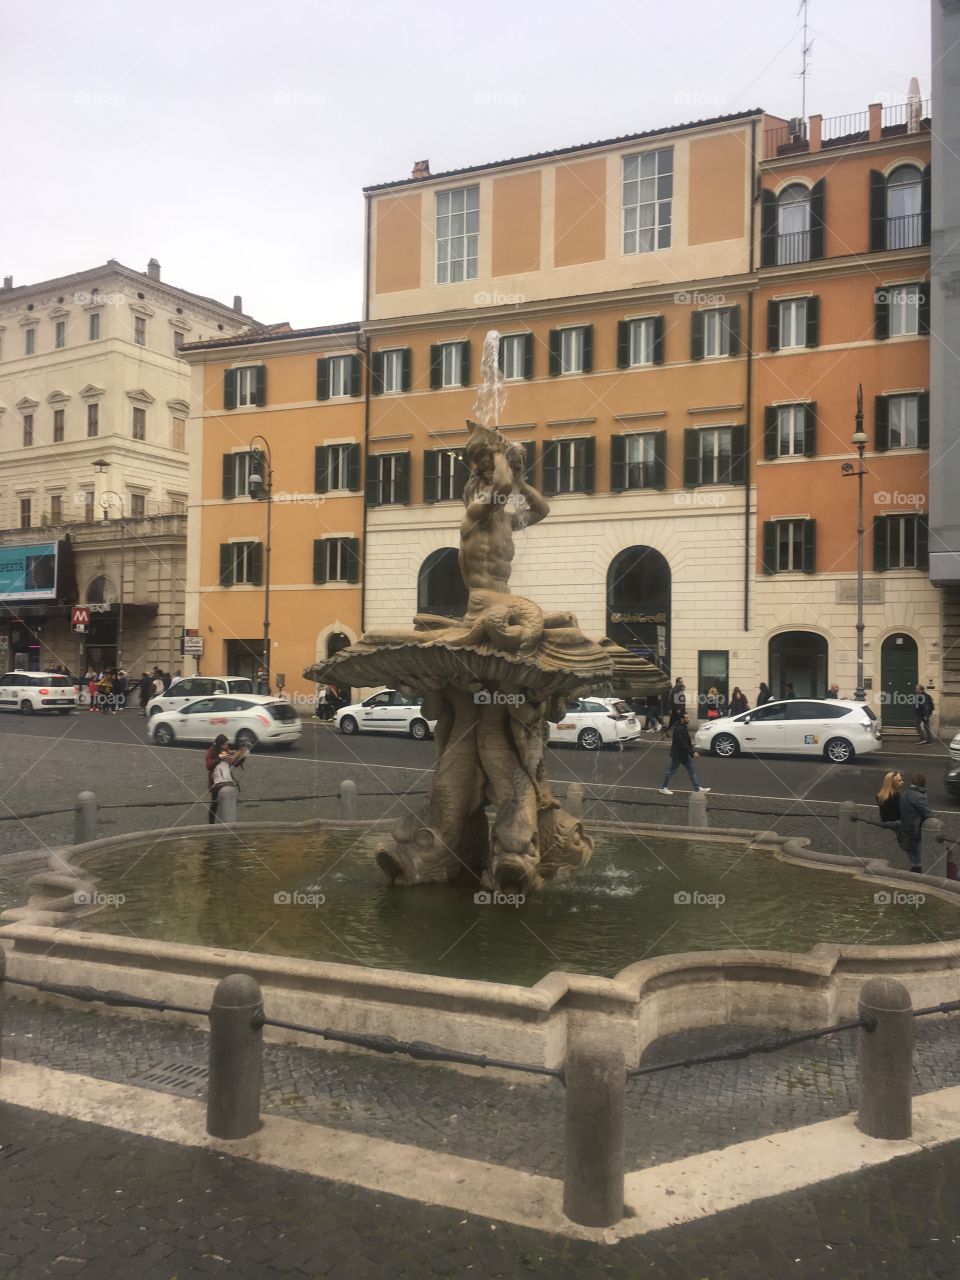 Foutain in Roma, Italy